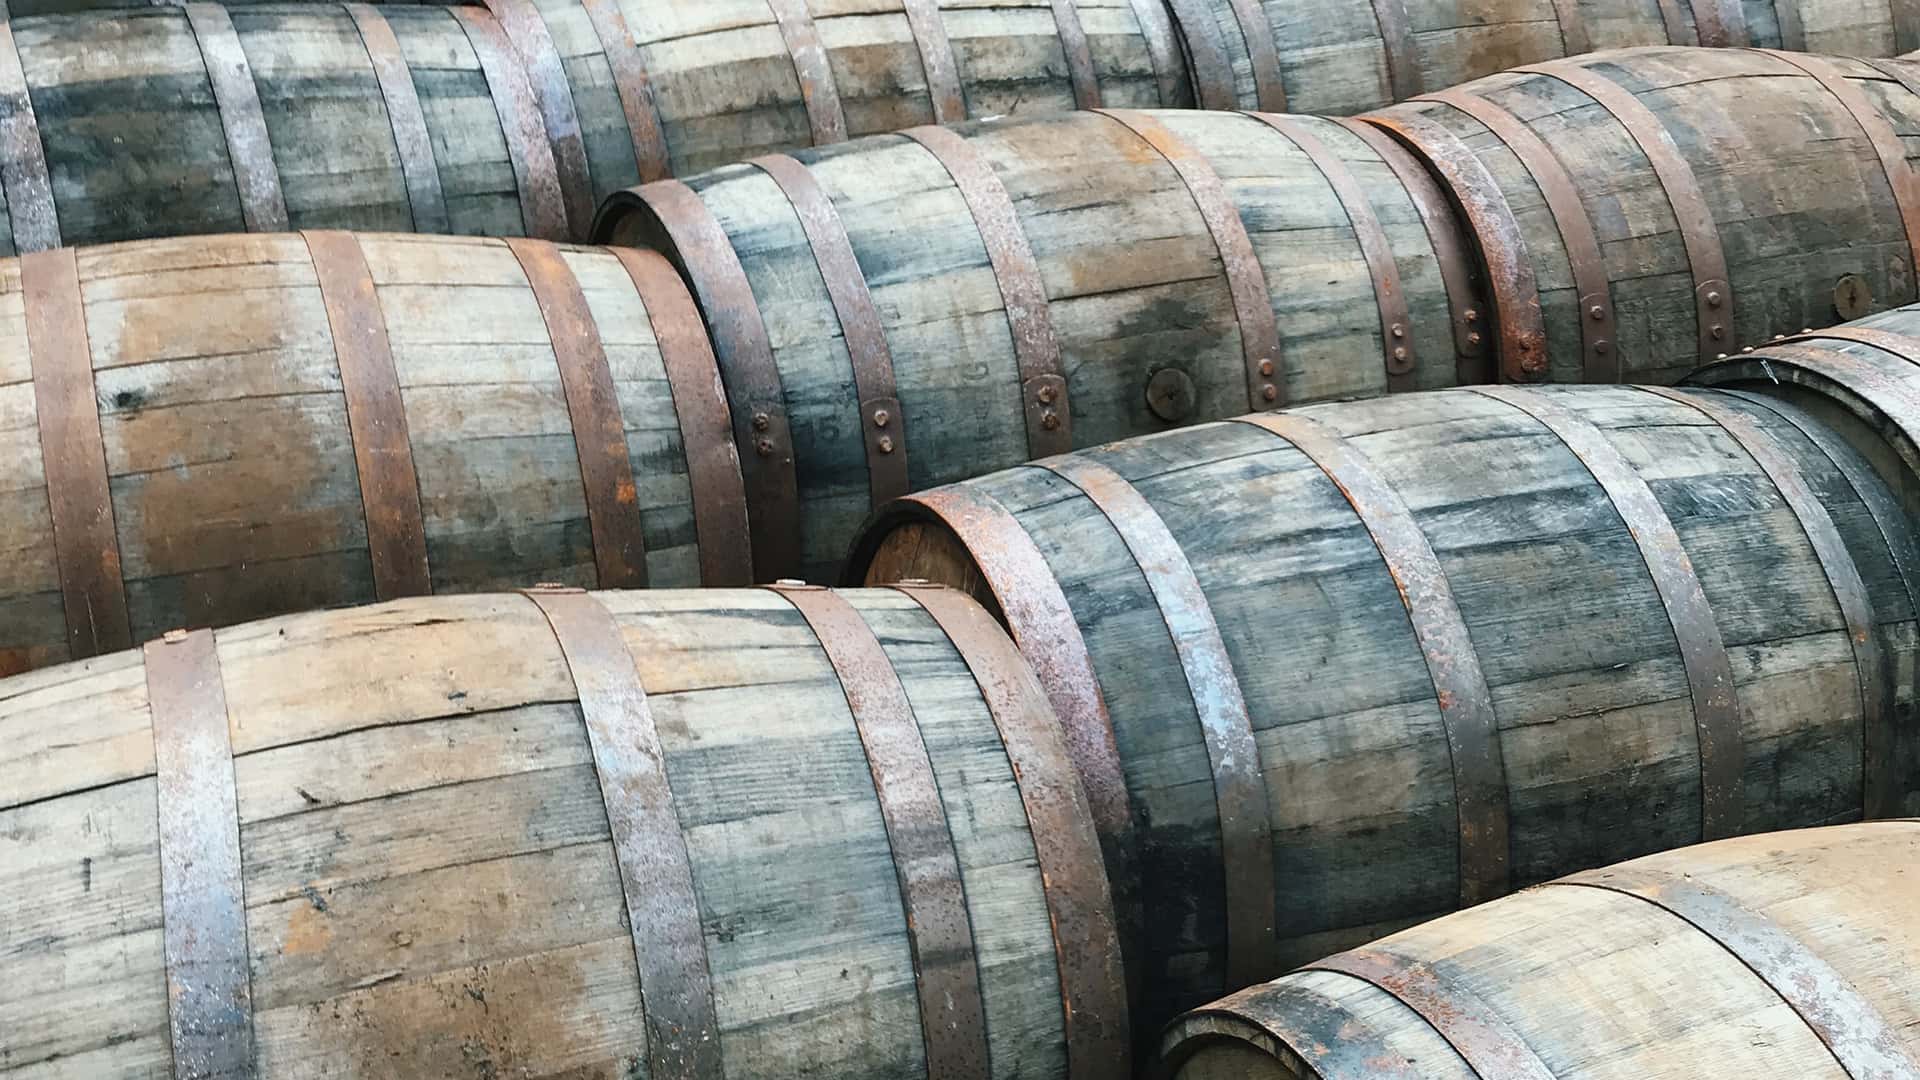 Guided visit to a Whiskey Distillery